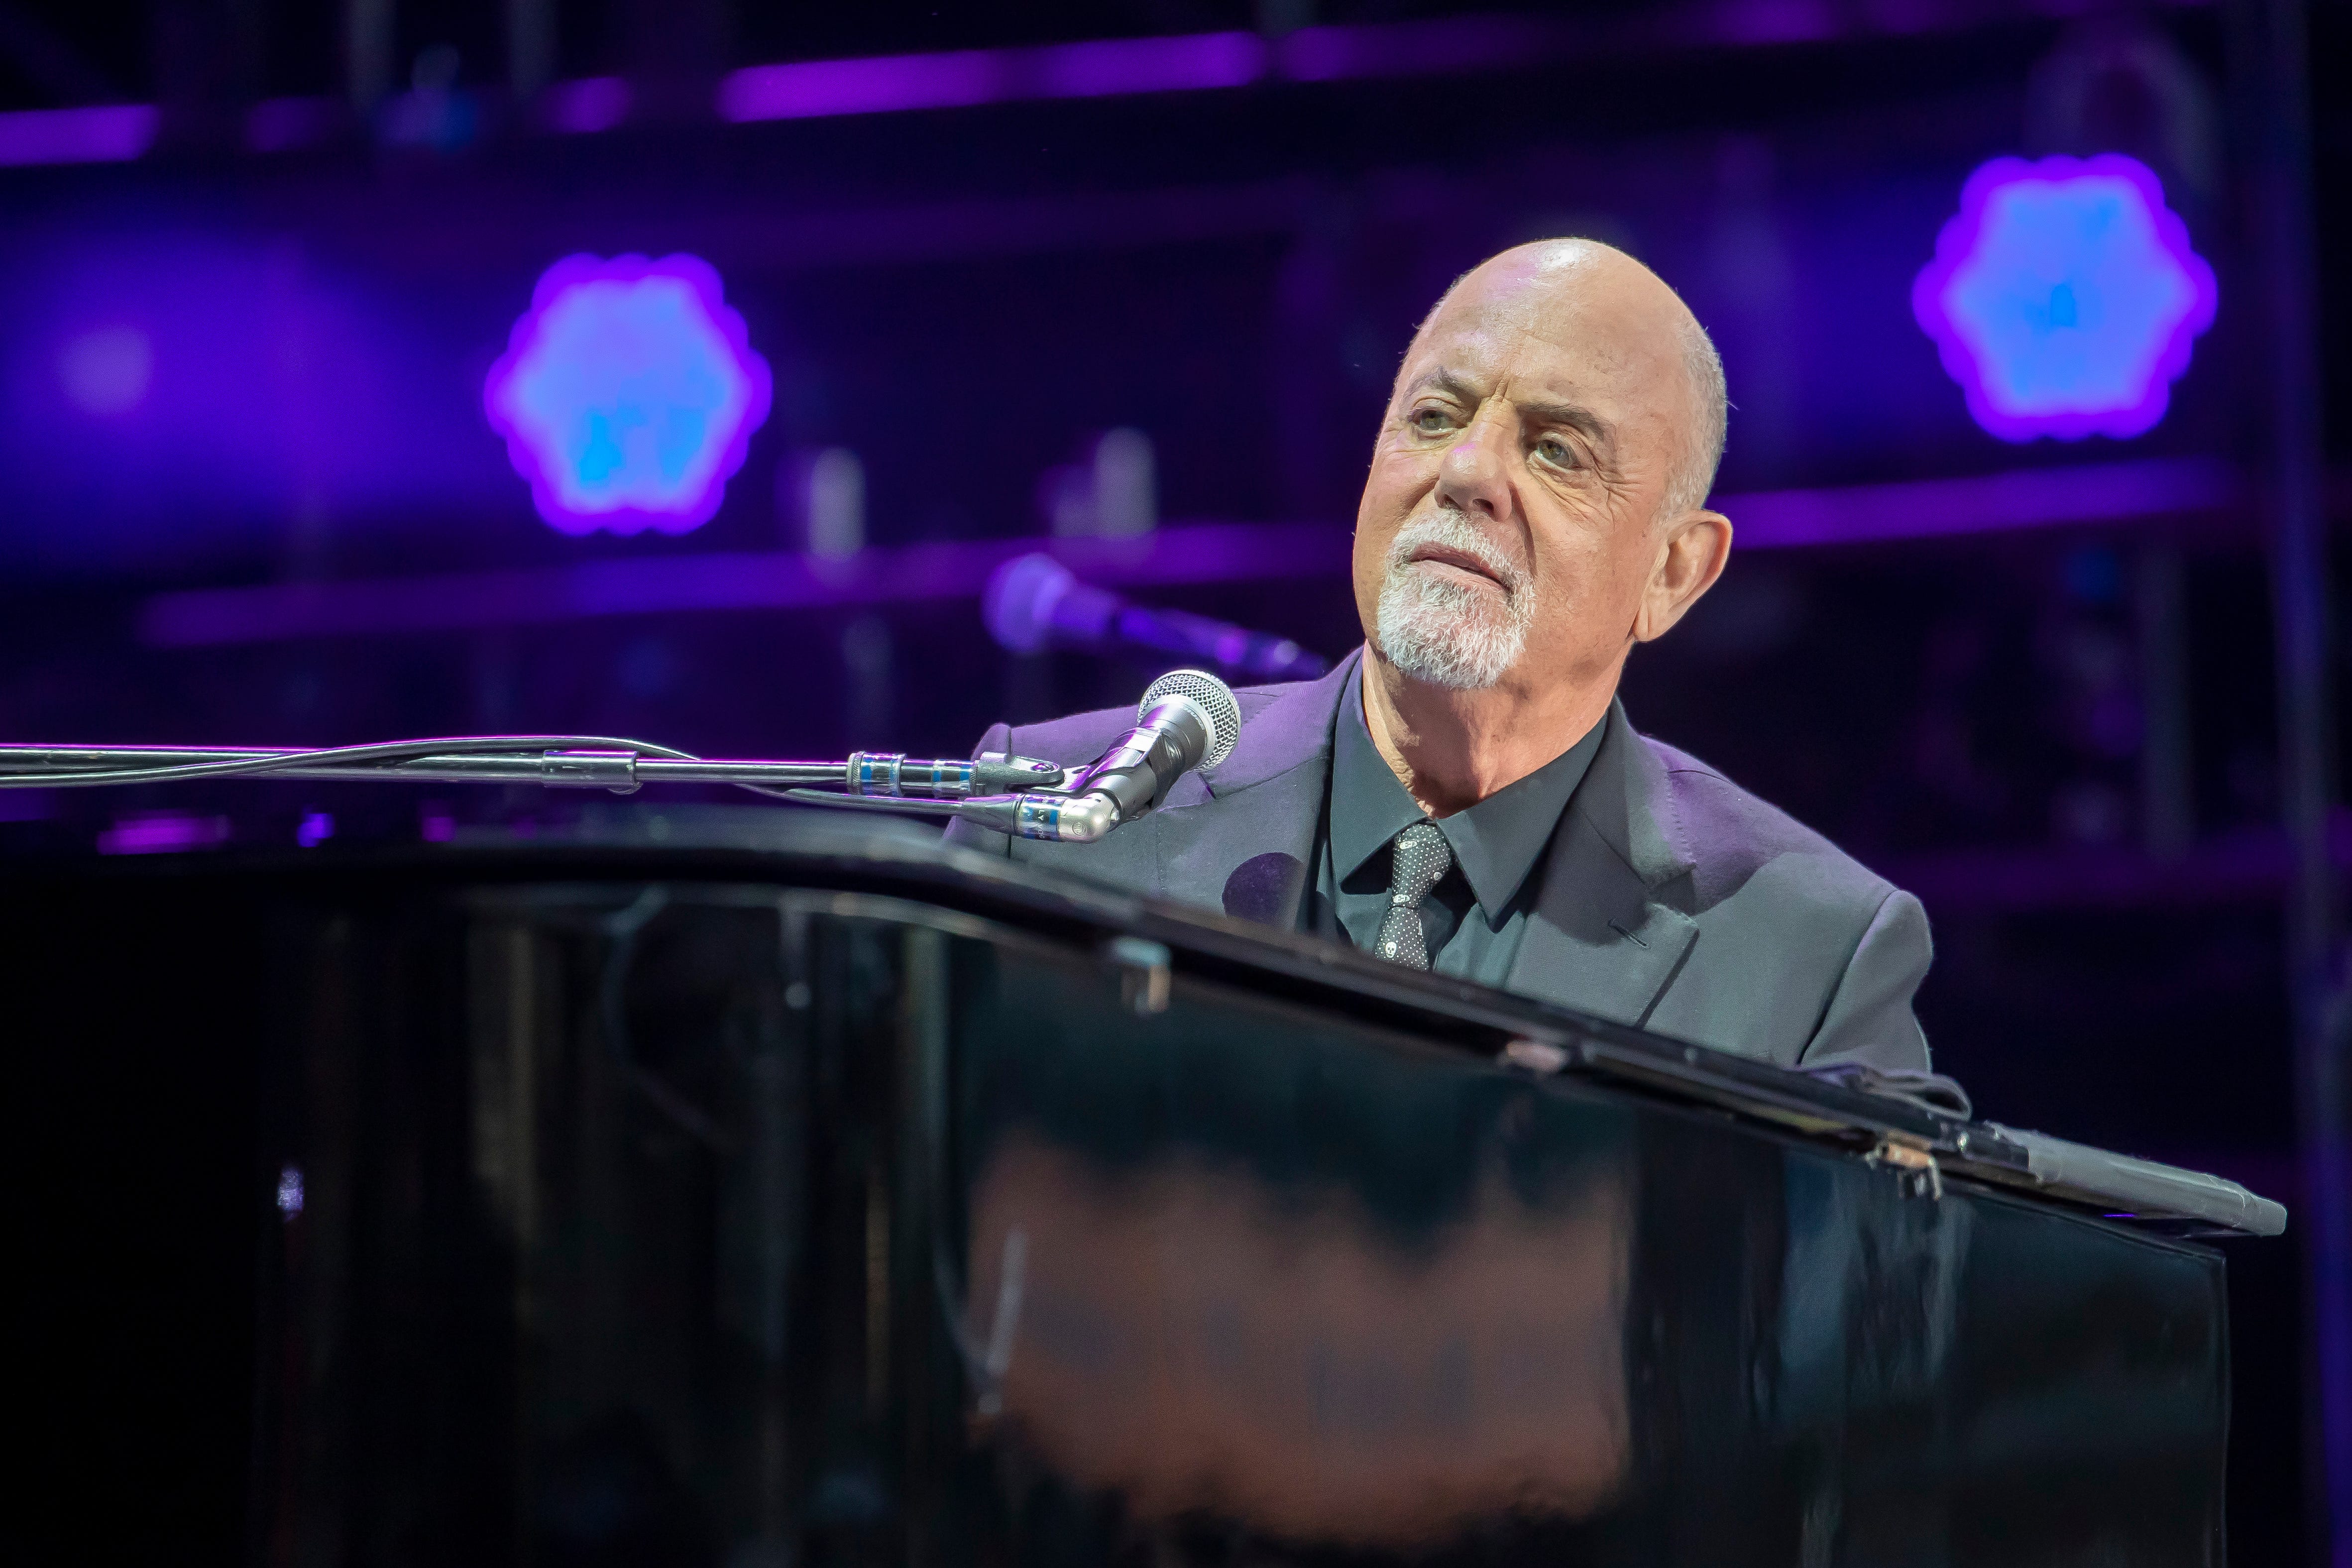 Billy Joel performs at Comerica Park in Detroit.